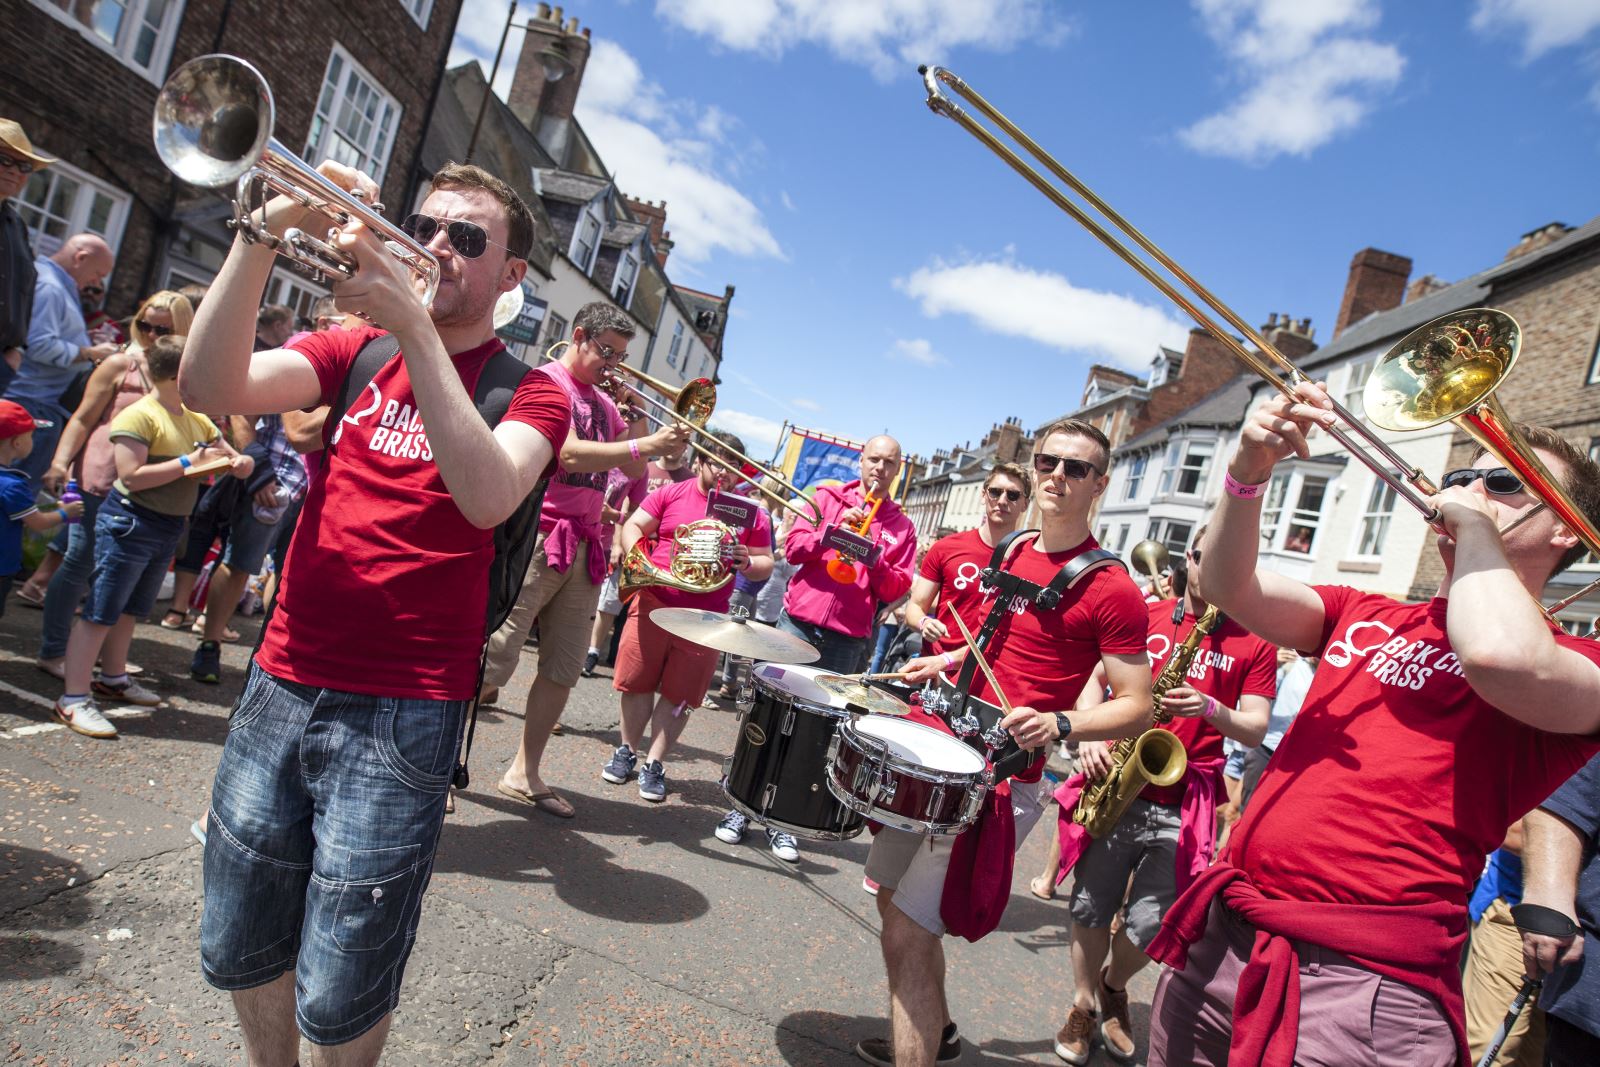 Durham BRASS Festival 2017 in the streets of the city